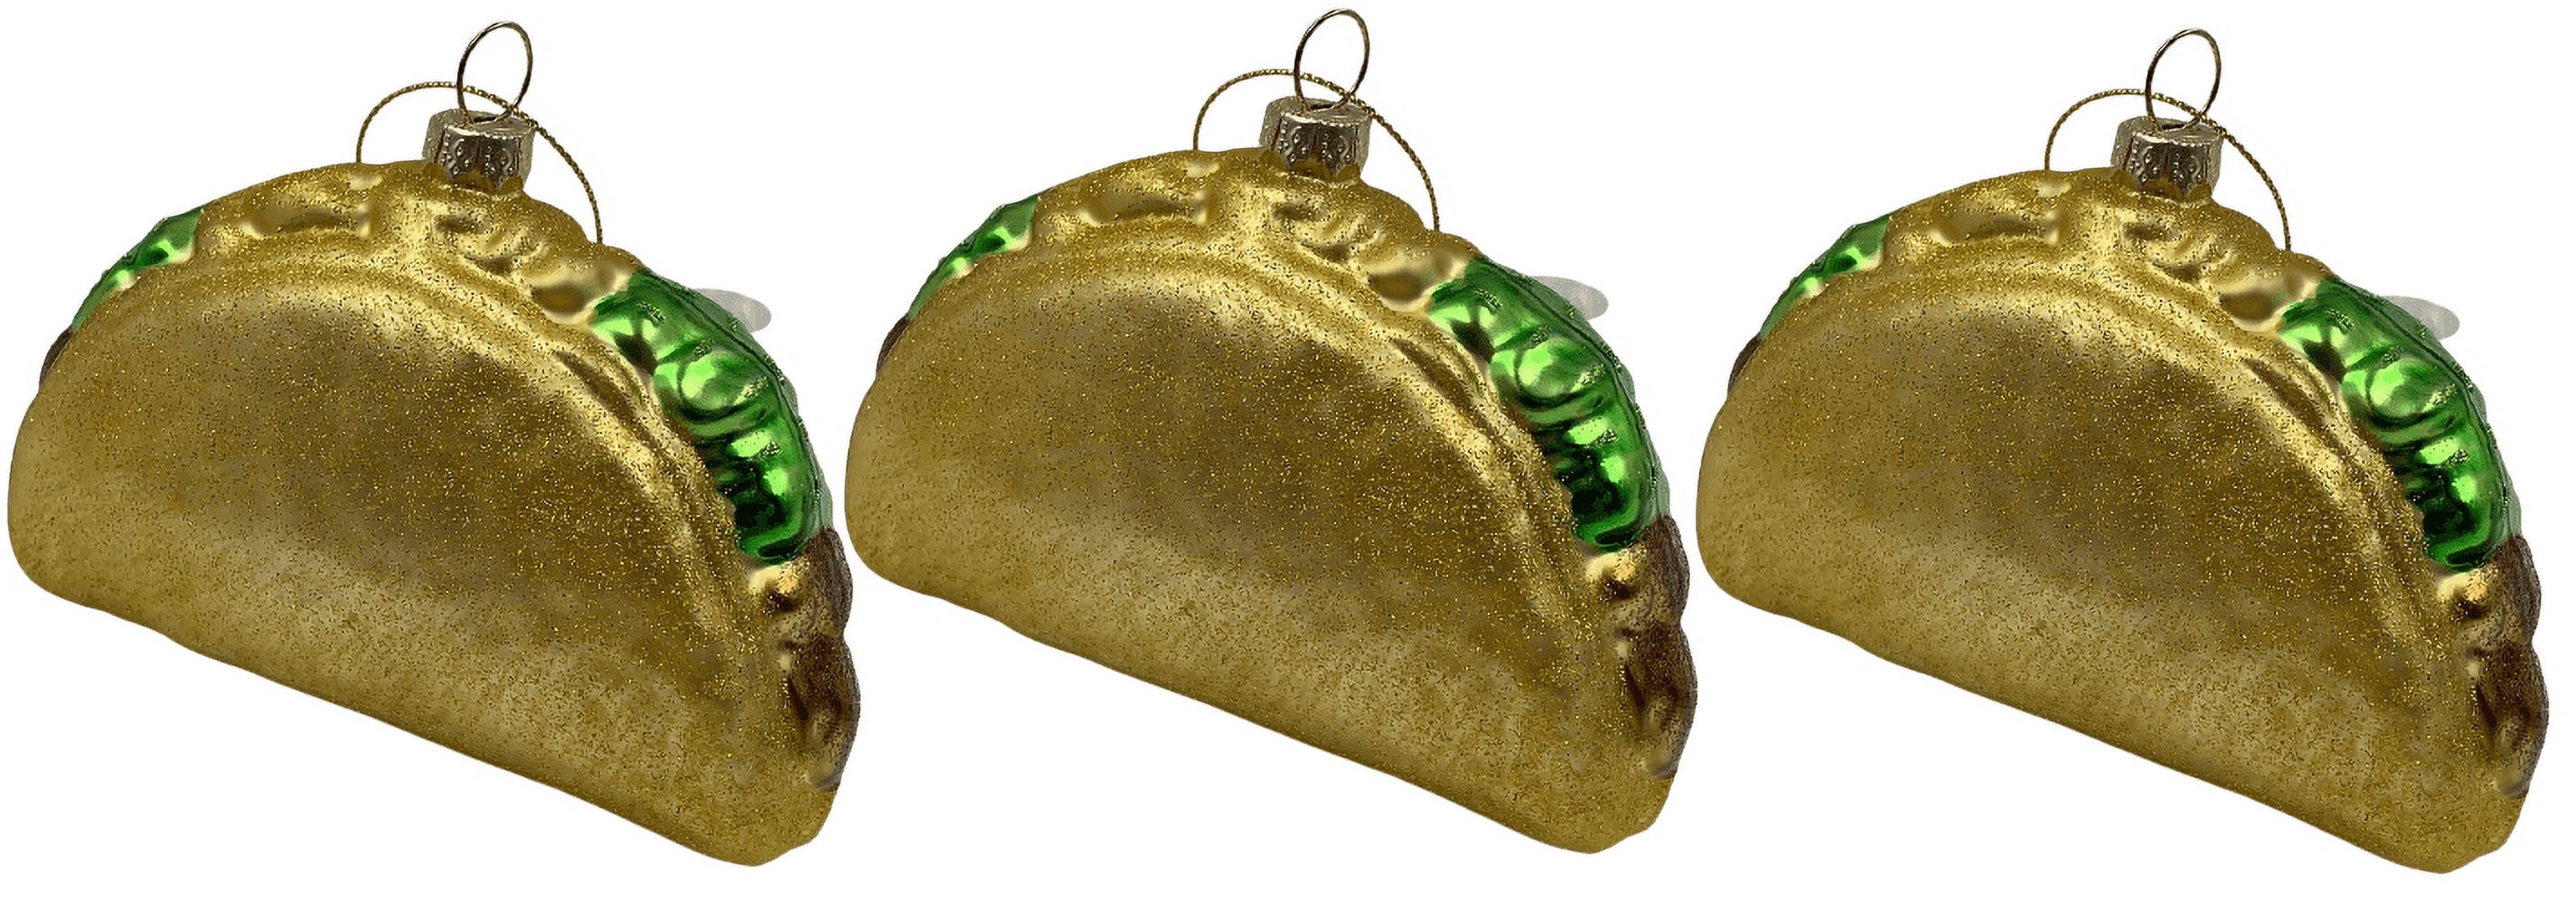 Pack Of 3 Glass Tacos - image 1 of 2